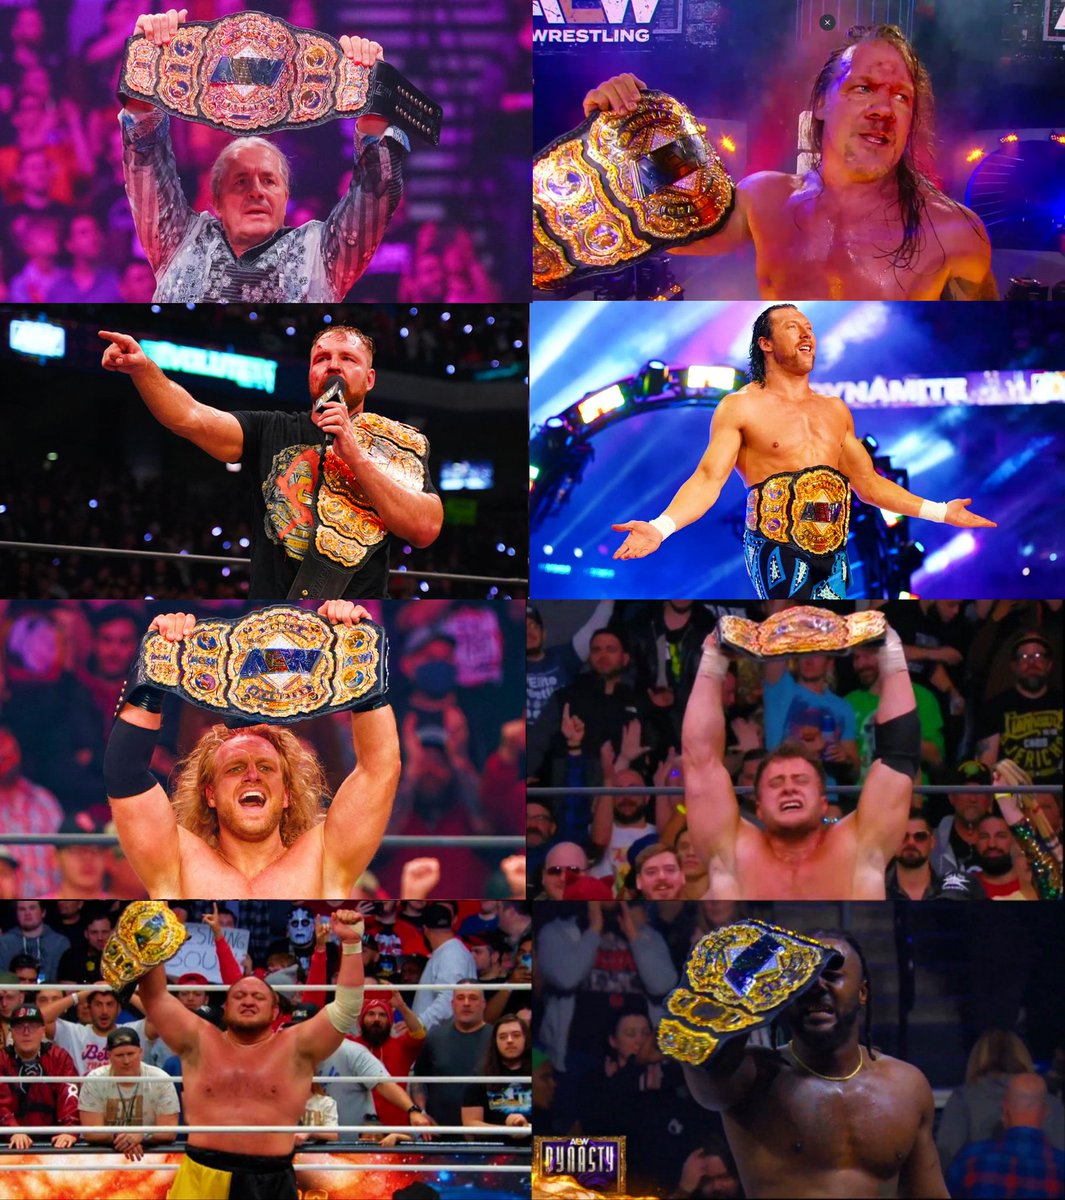 Aew has had 8 different world champions and 1 multi-time world champion. #AEWDynamite #AEW #SwervesHouse